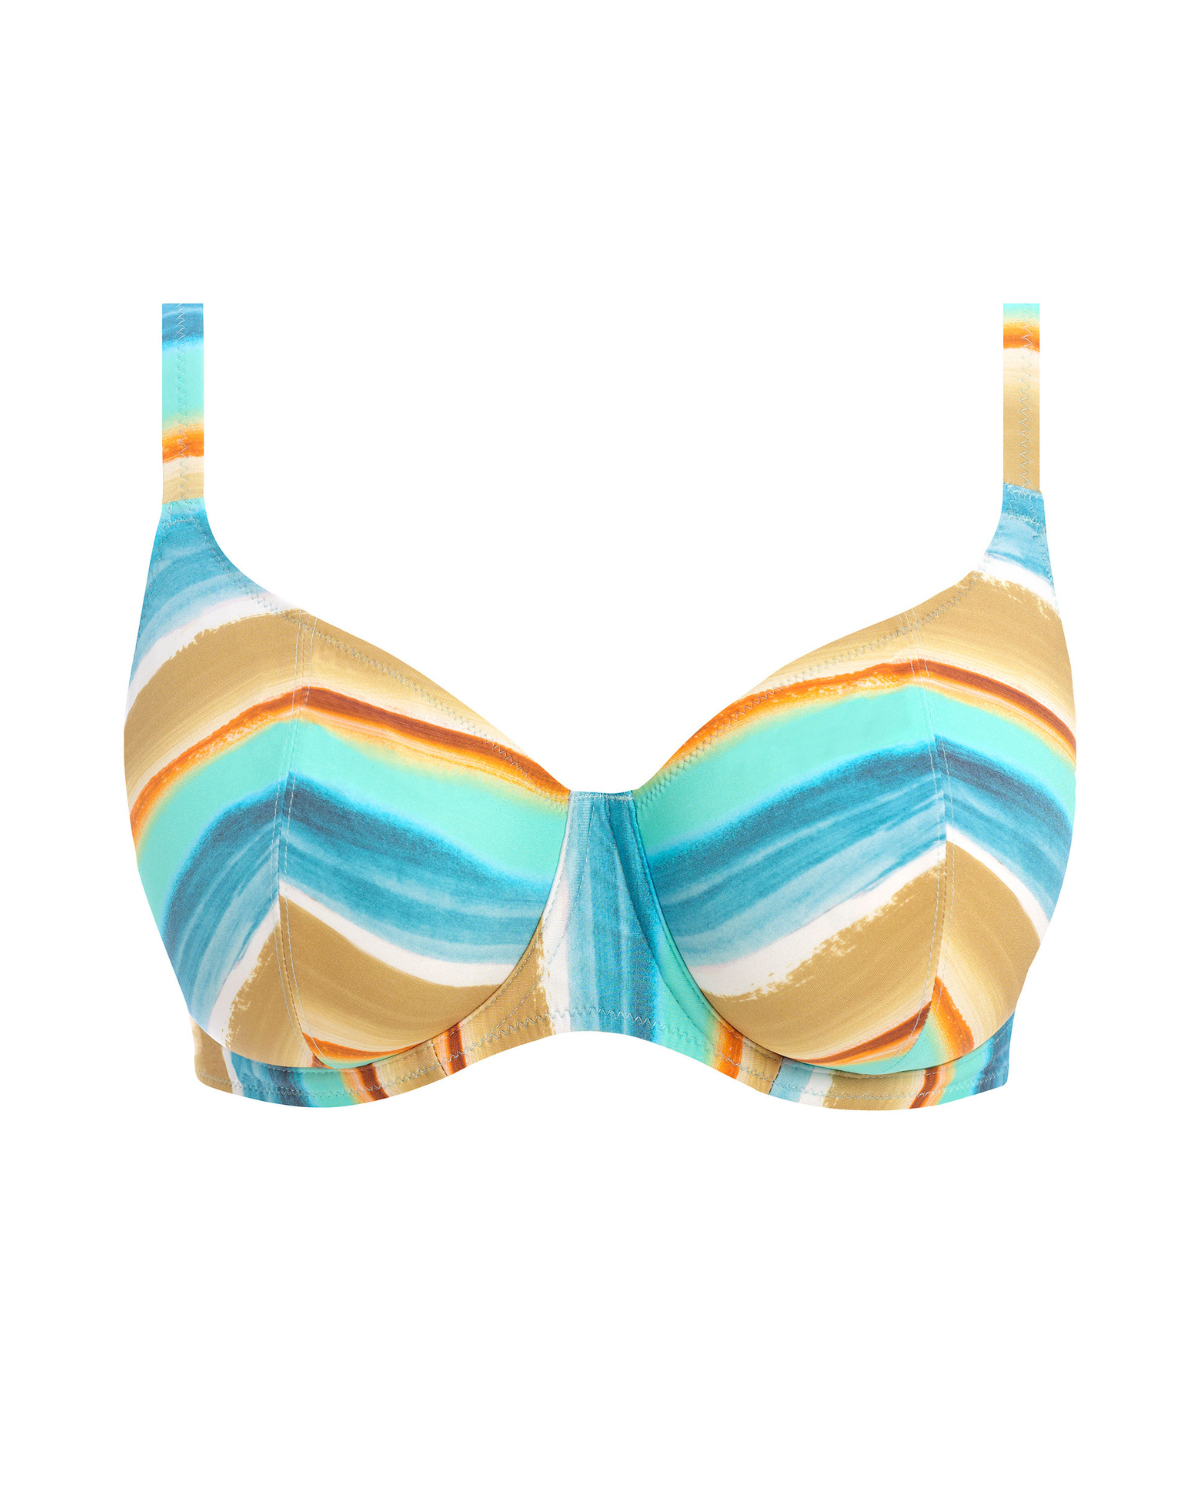 Flat lay of an underwire plunge bikini top in a white, blue, gold, and orange striped watercolor print